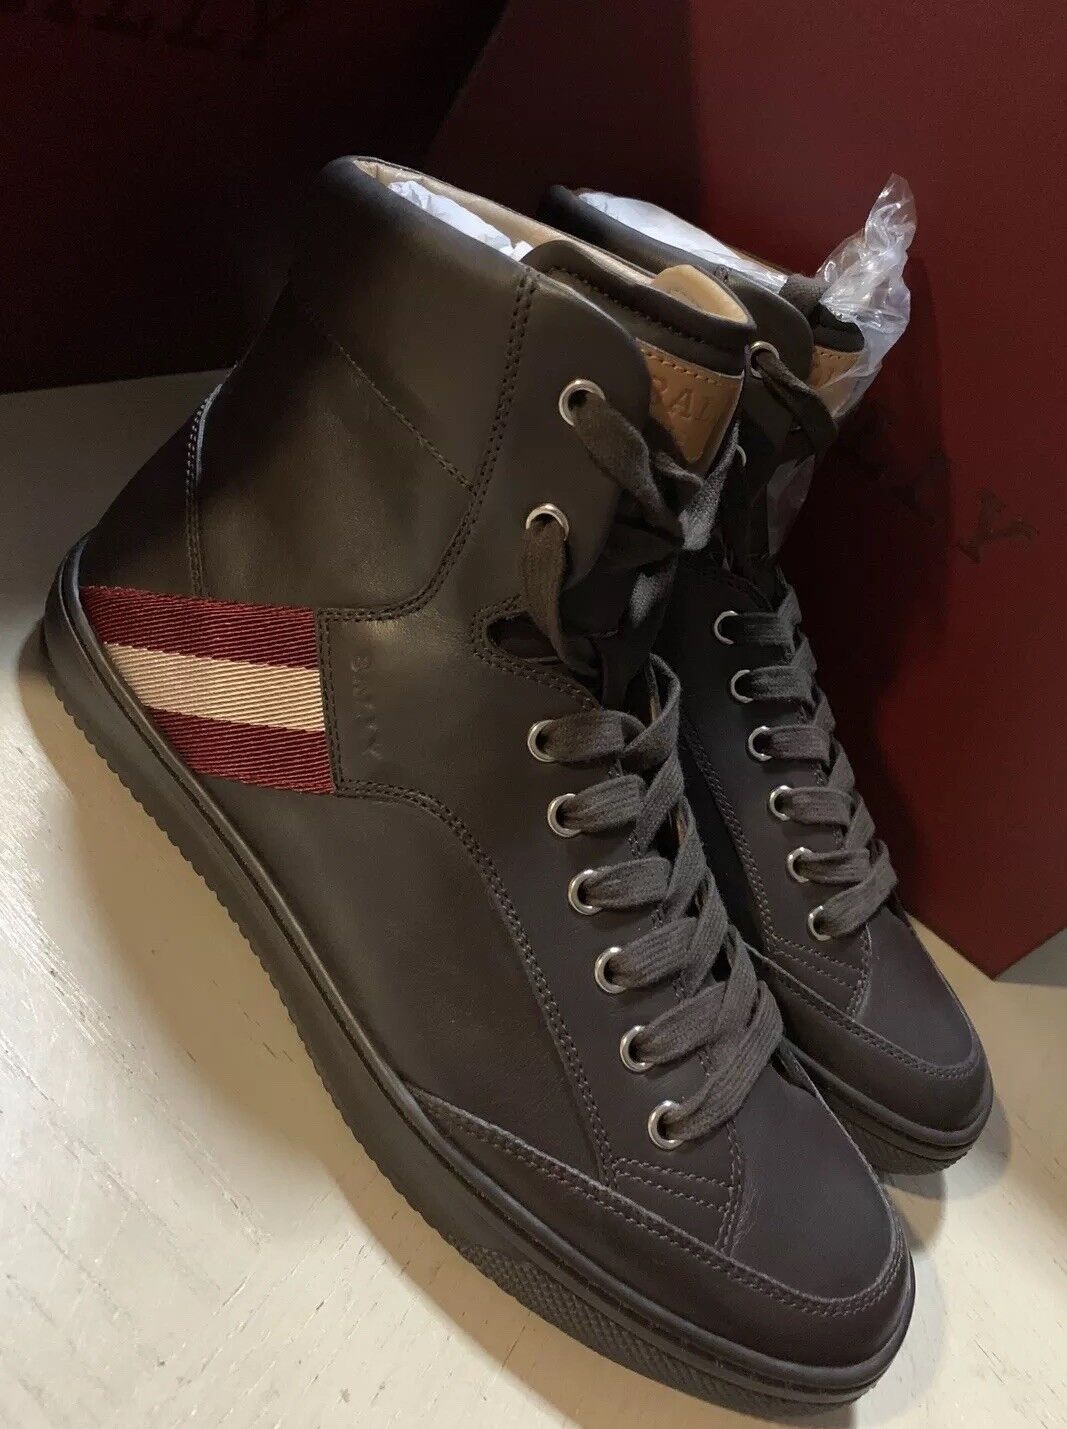 Bally Men Oldani Leather High-Top Sneakers Brown ( Chocolate ) 7 US New $650